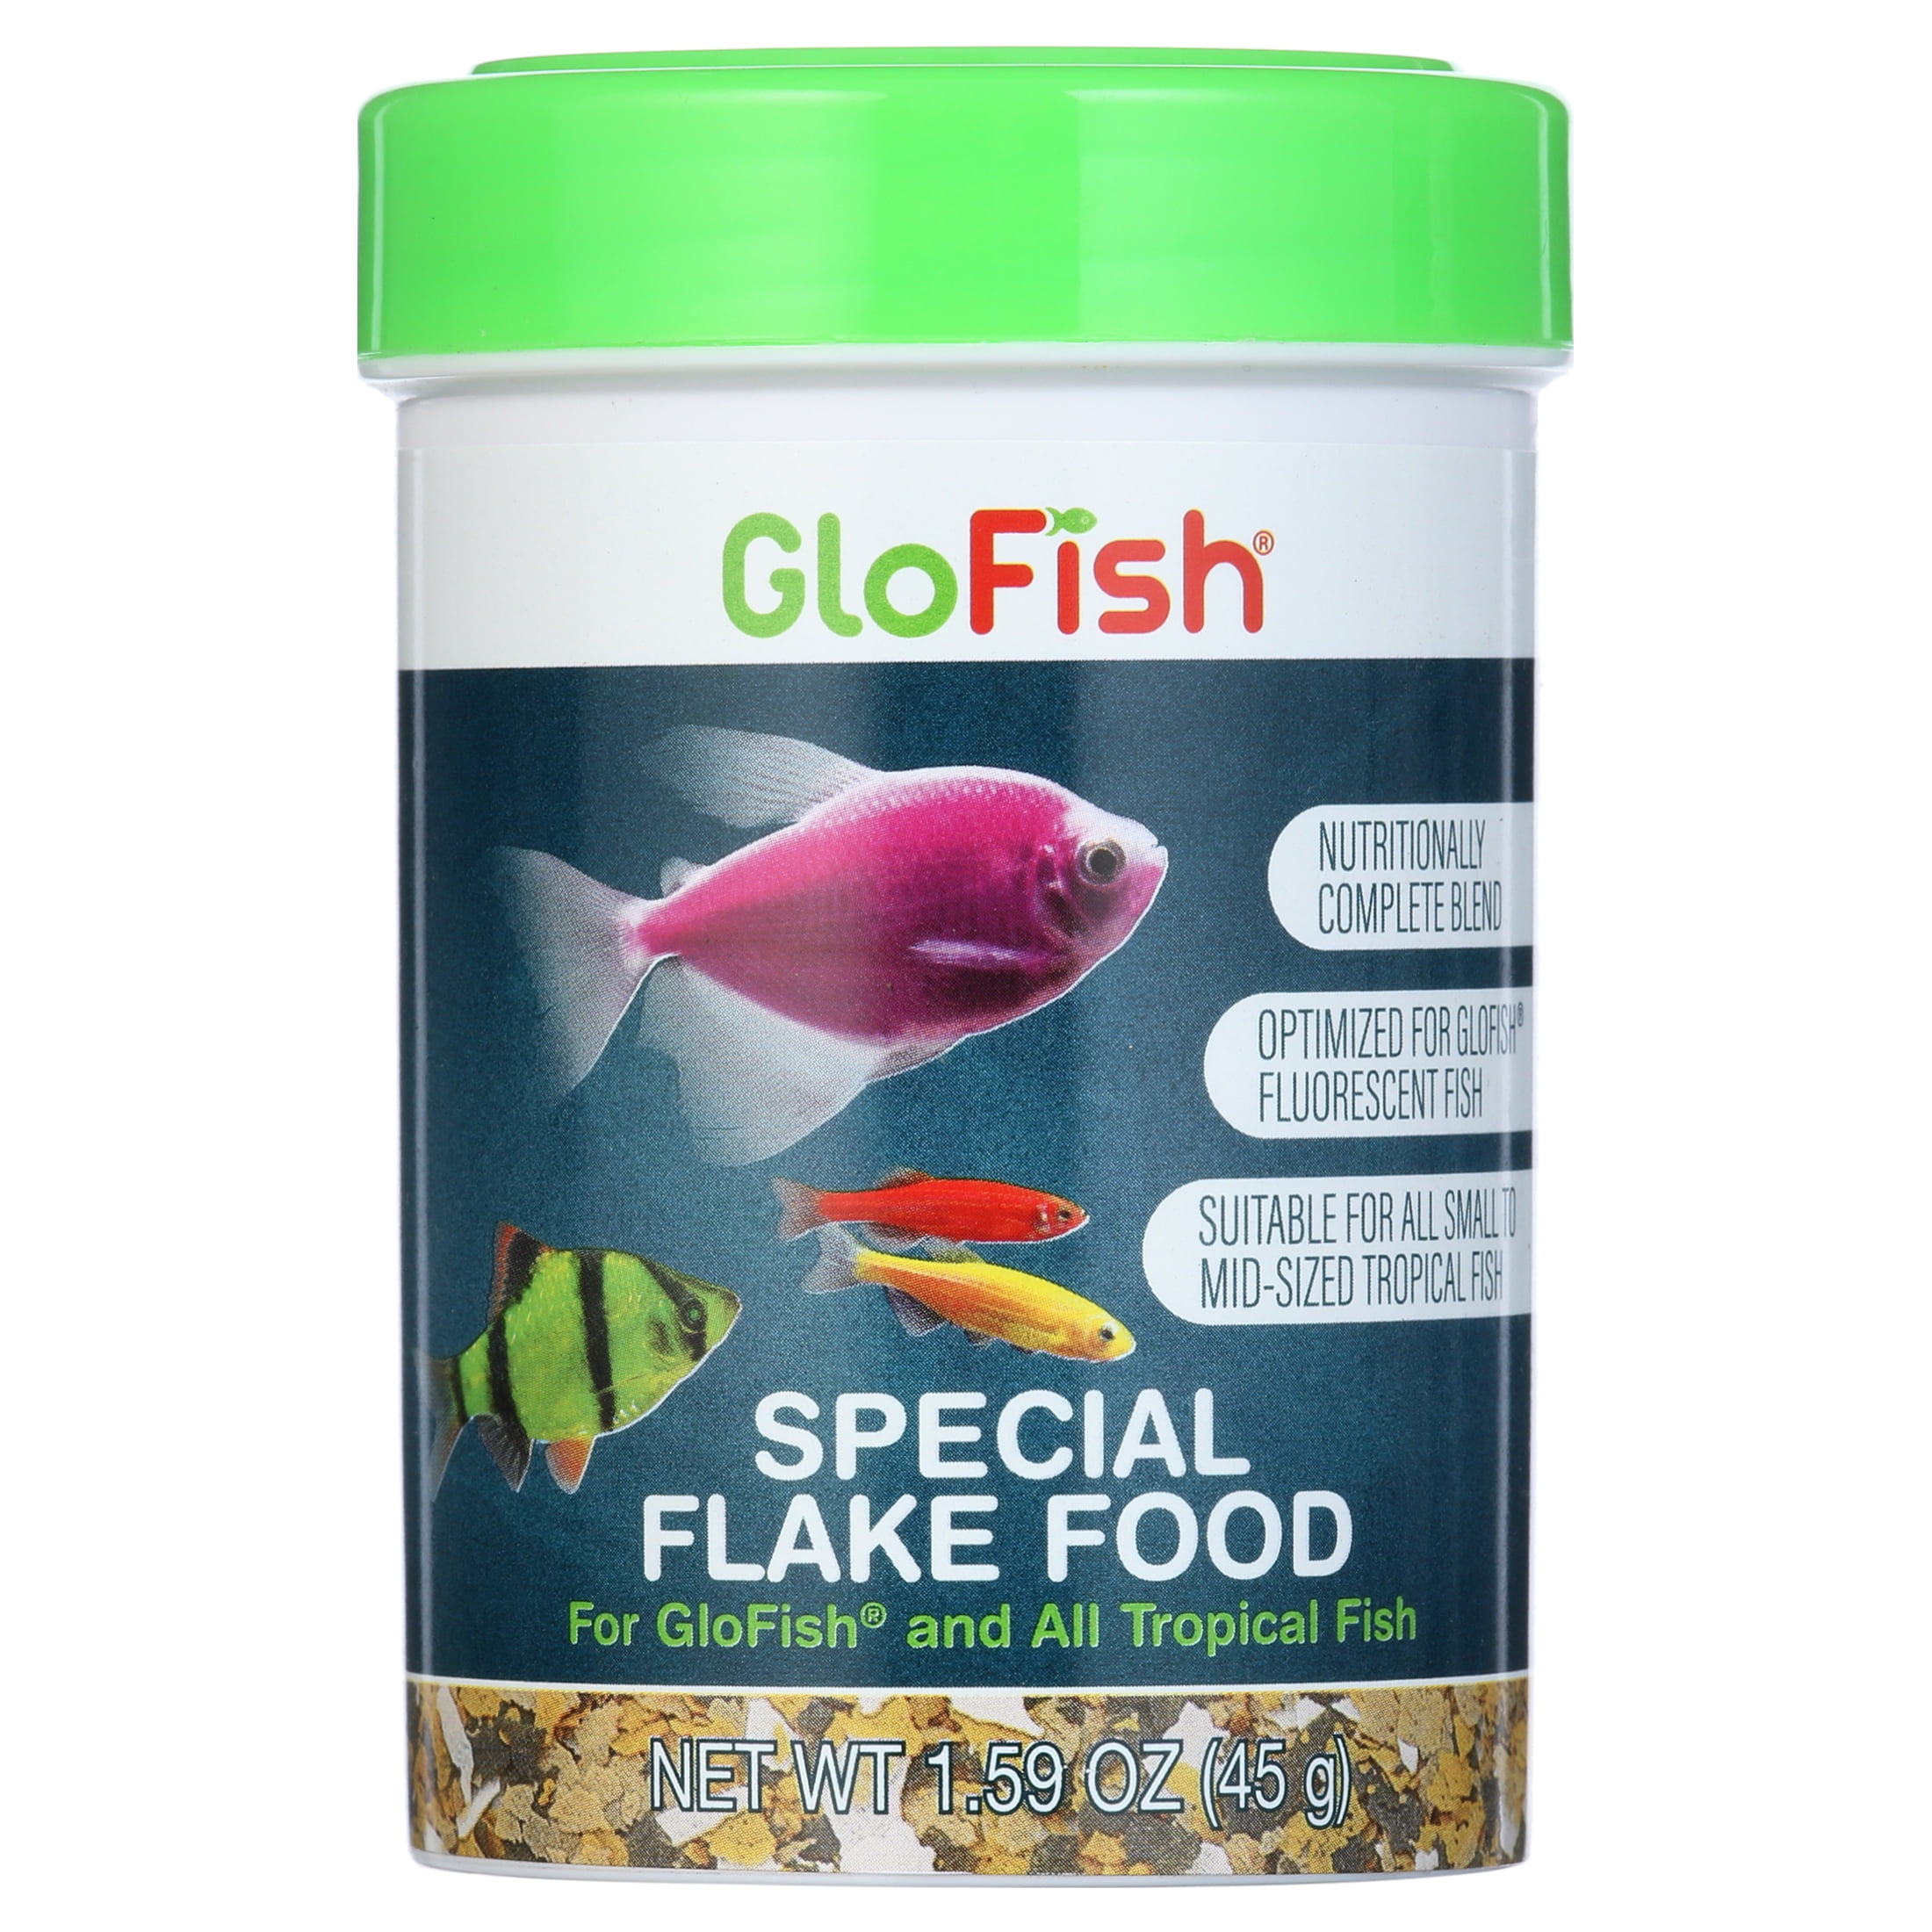 Buy Glow Fish 13 Products Online in Kuwait City at Best Prices on